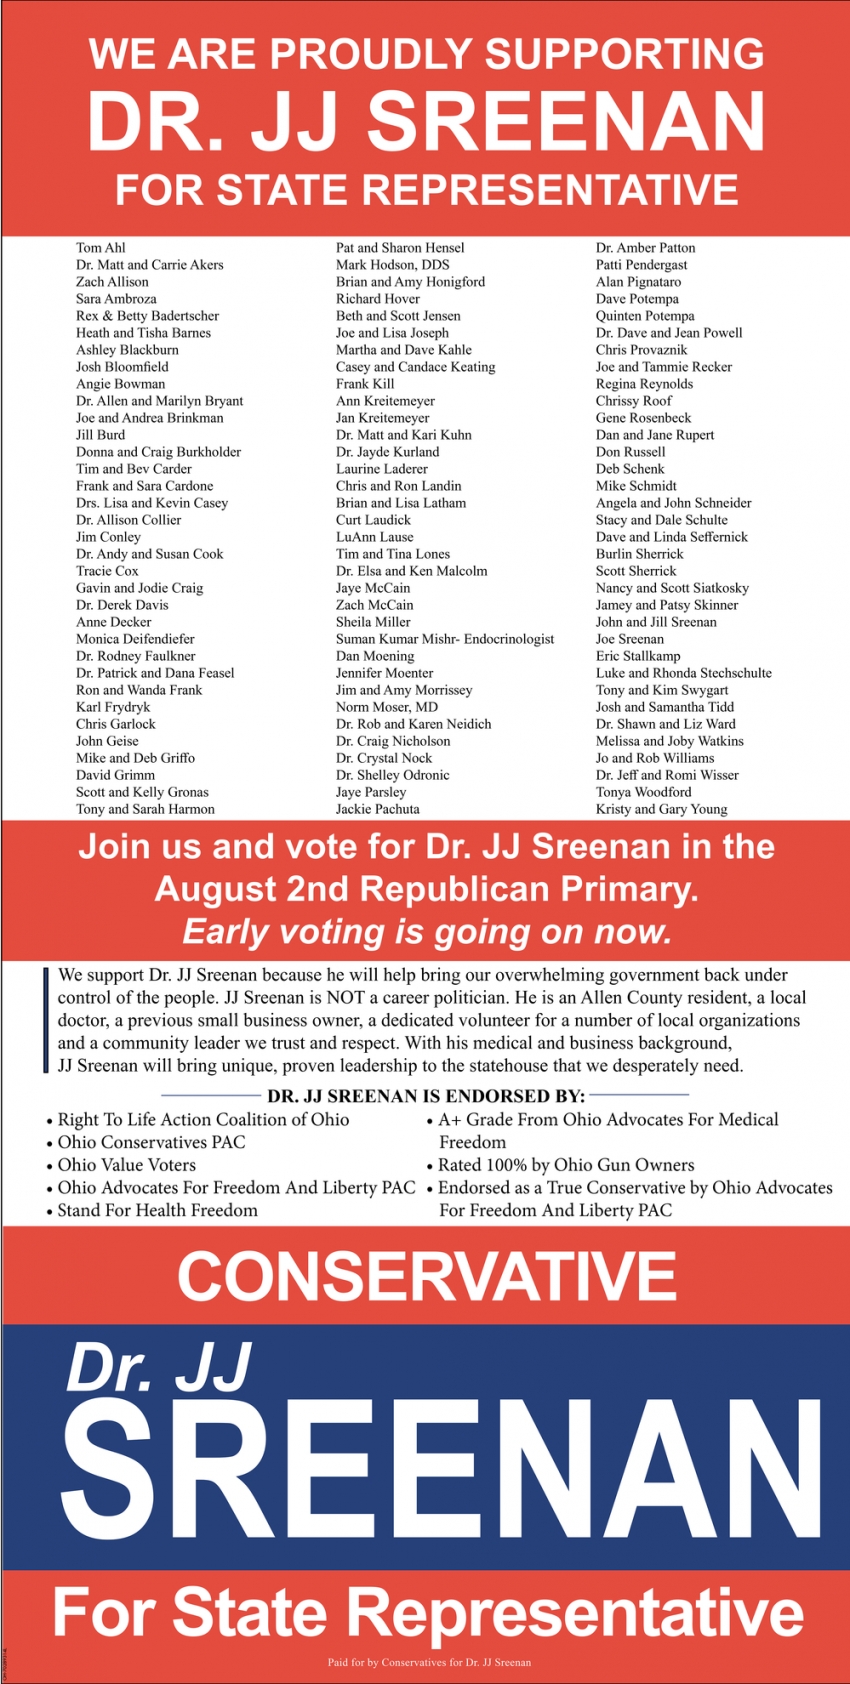 We Are Proudly Supporting Dr. JJ Sreenan For State Representative